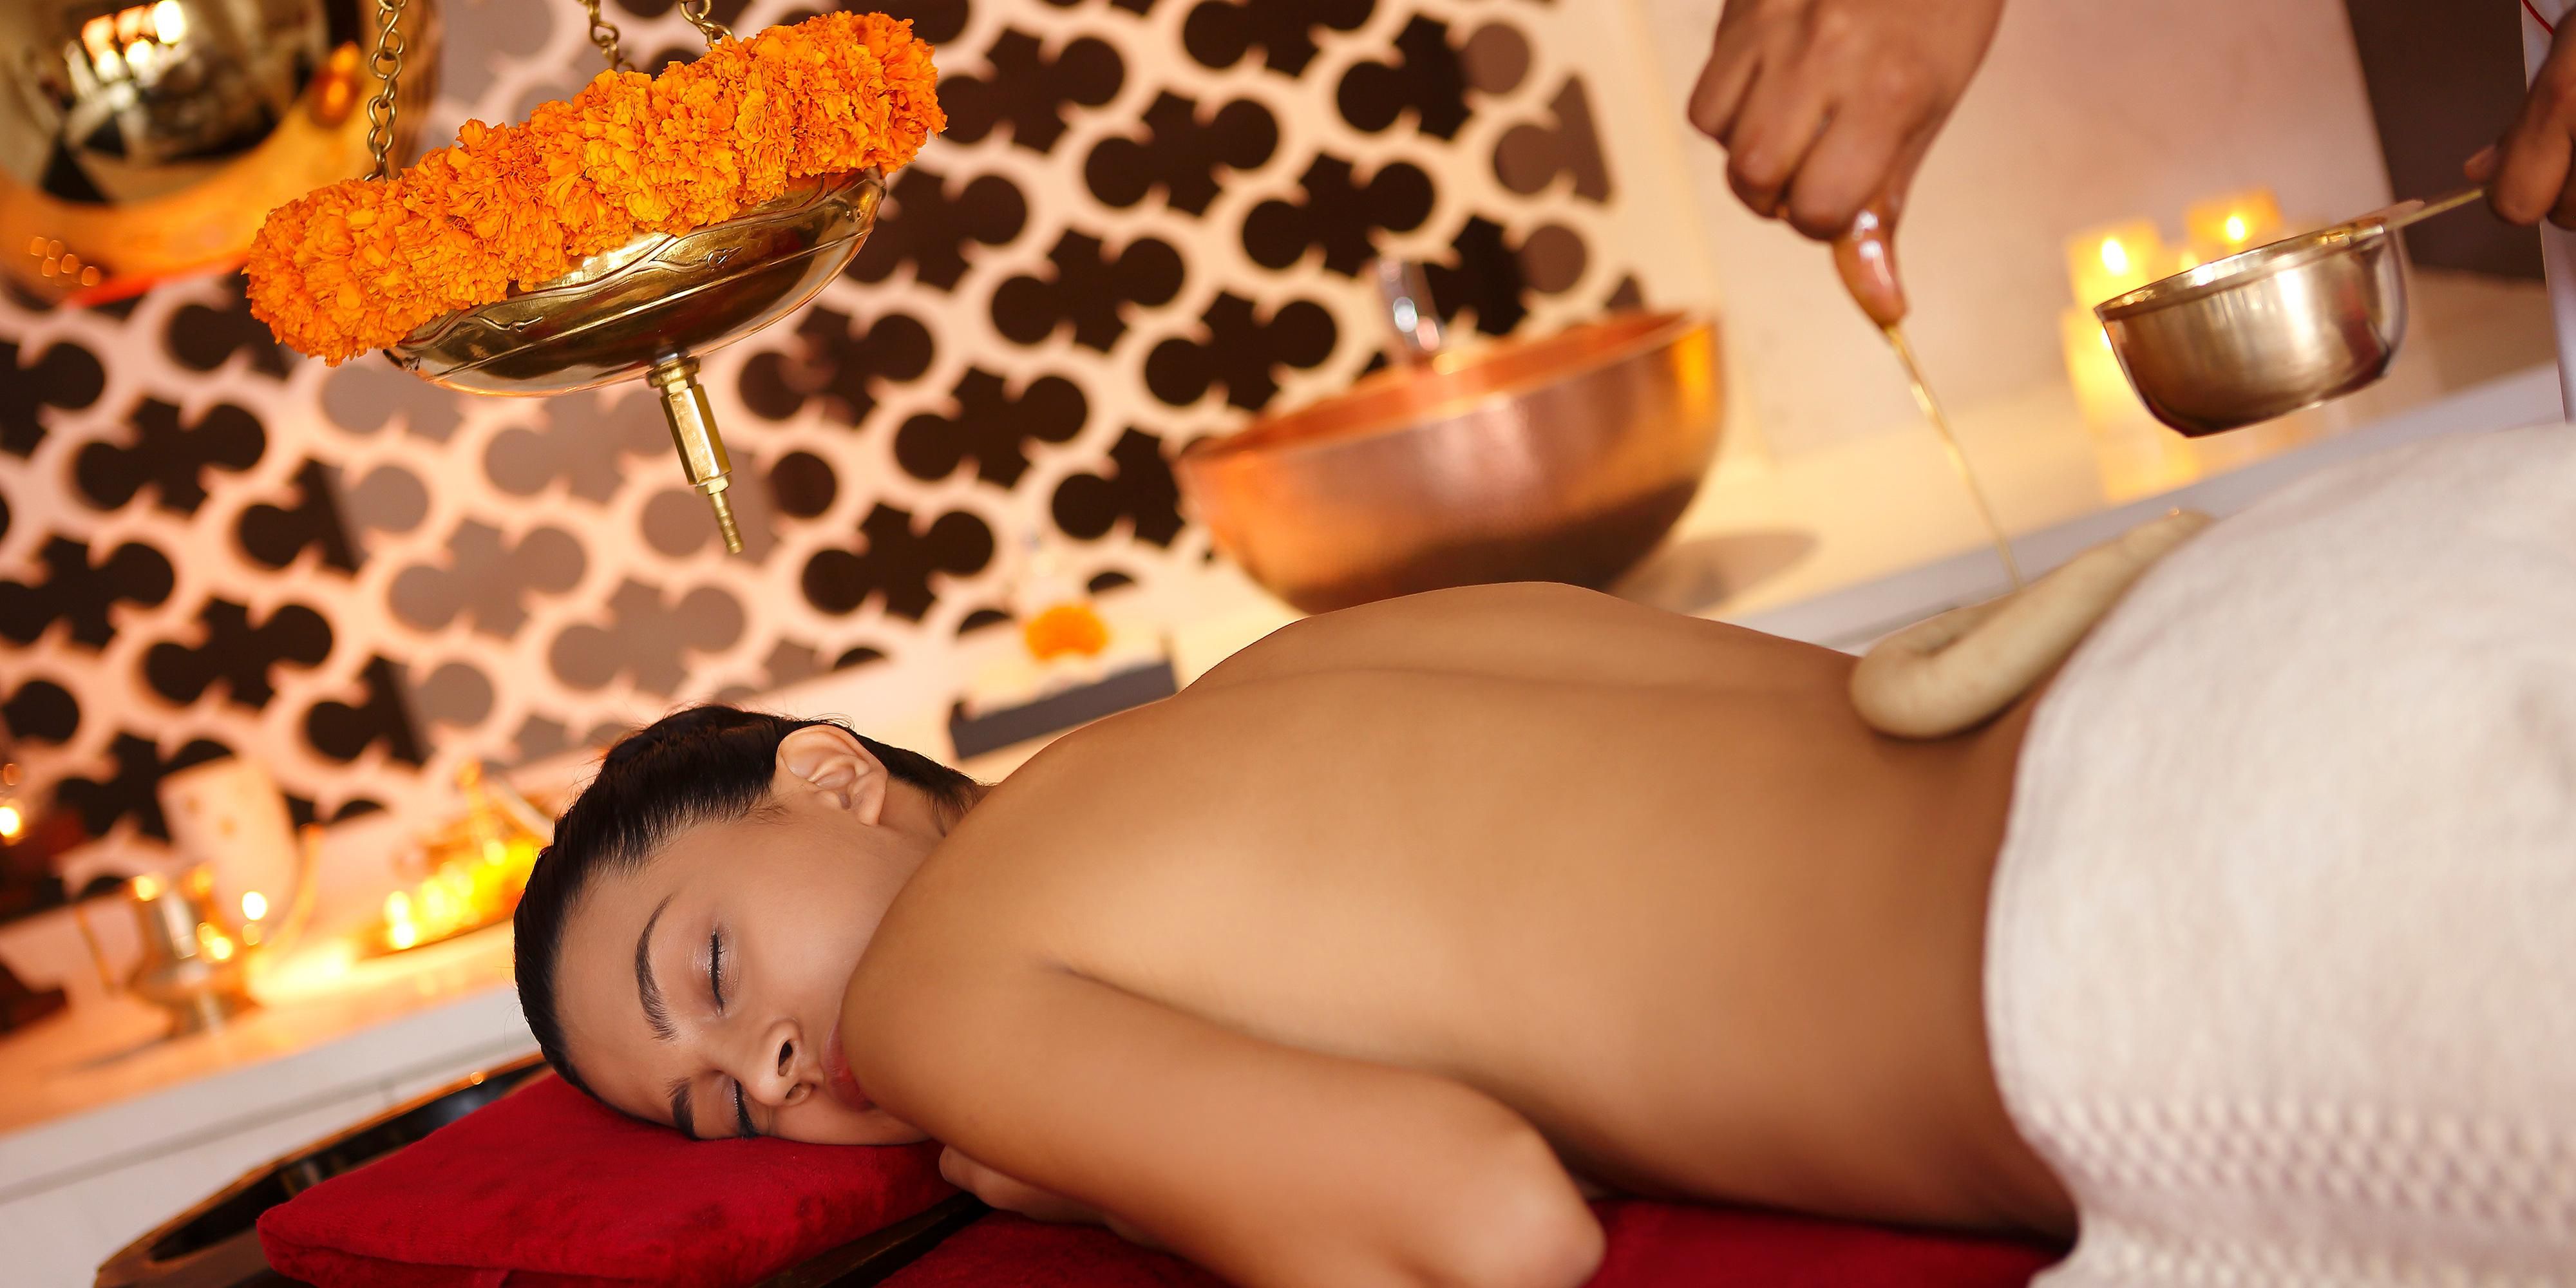 At Amrtam, you will experience the highest levels of body care and relaxation treatments in a spectacular ocean-view setting. Drawing inspiration from traditional Eastern medicines and naturopathy, our treatments are designed to restore balance to the body, harnessing all the curative effects of Ayurveda and other holistic practices